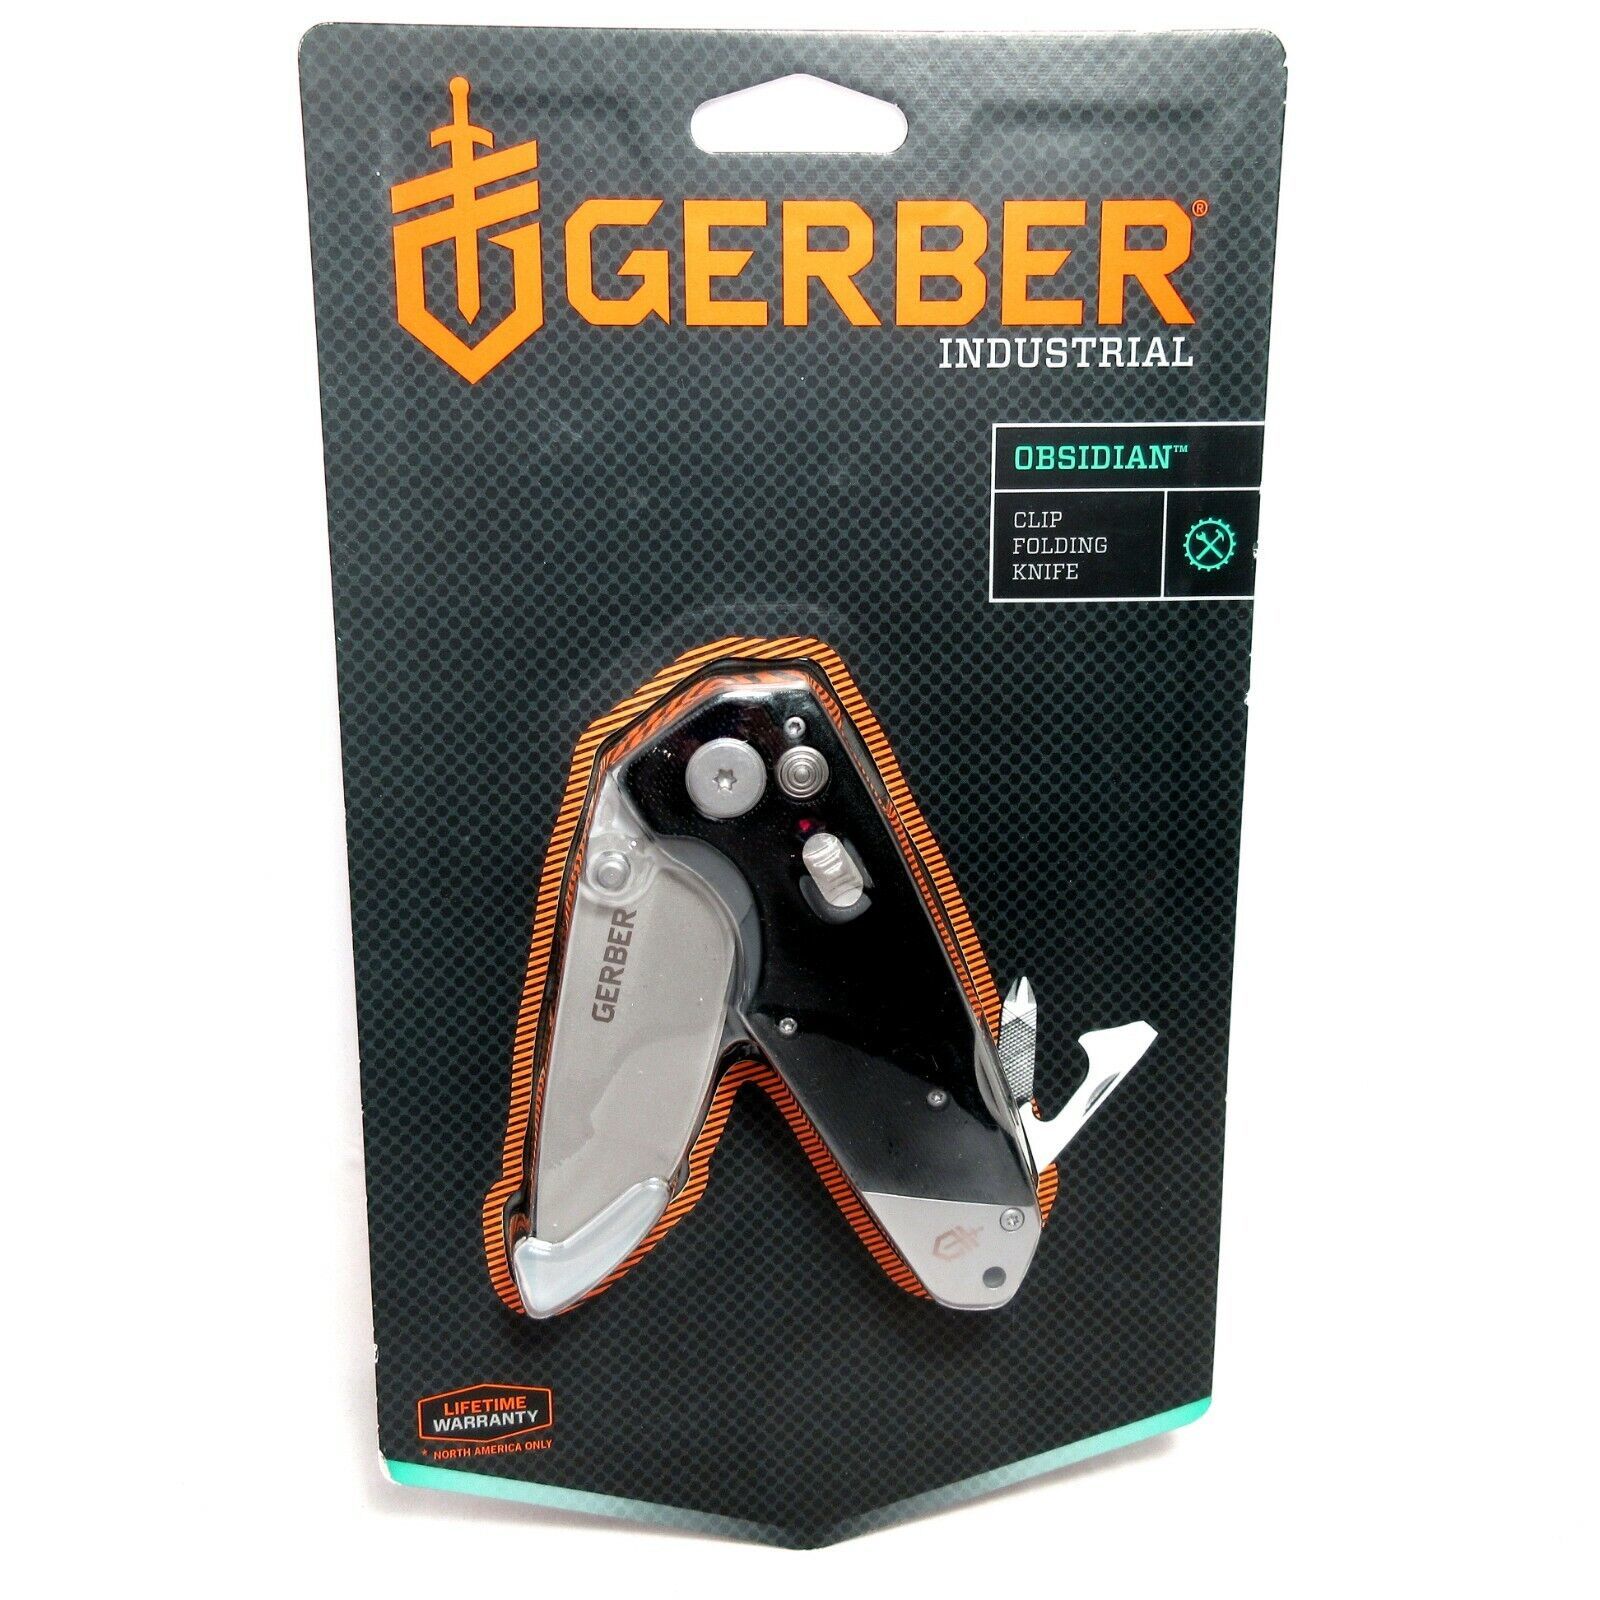 Primary image for Gerber Industrial Obsidian Pocket Knife Stainless Steel Blade Fine Multi Tool